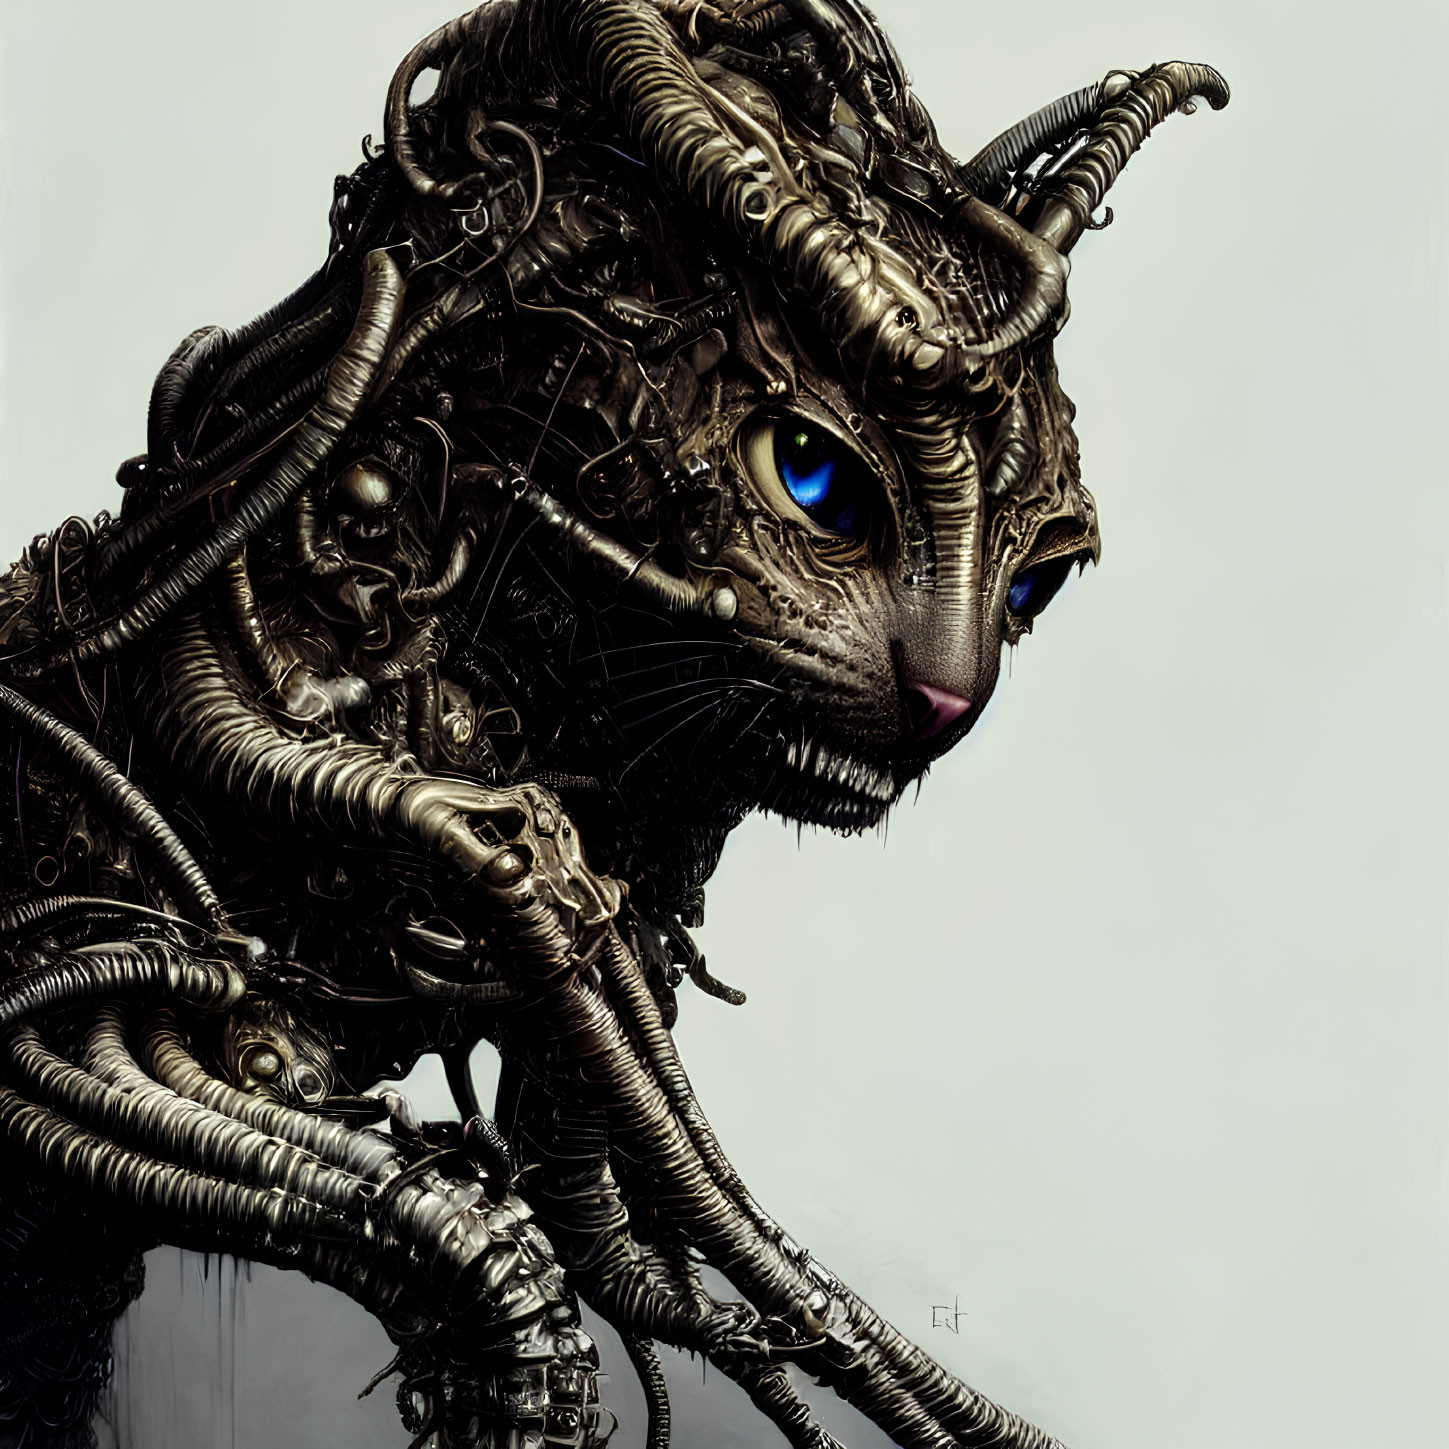 Detailed Illustration: Mechanical Cat with Intricate Metal Components and Striking Blue Eyes